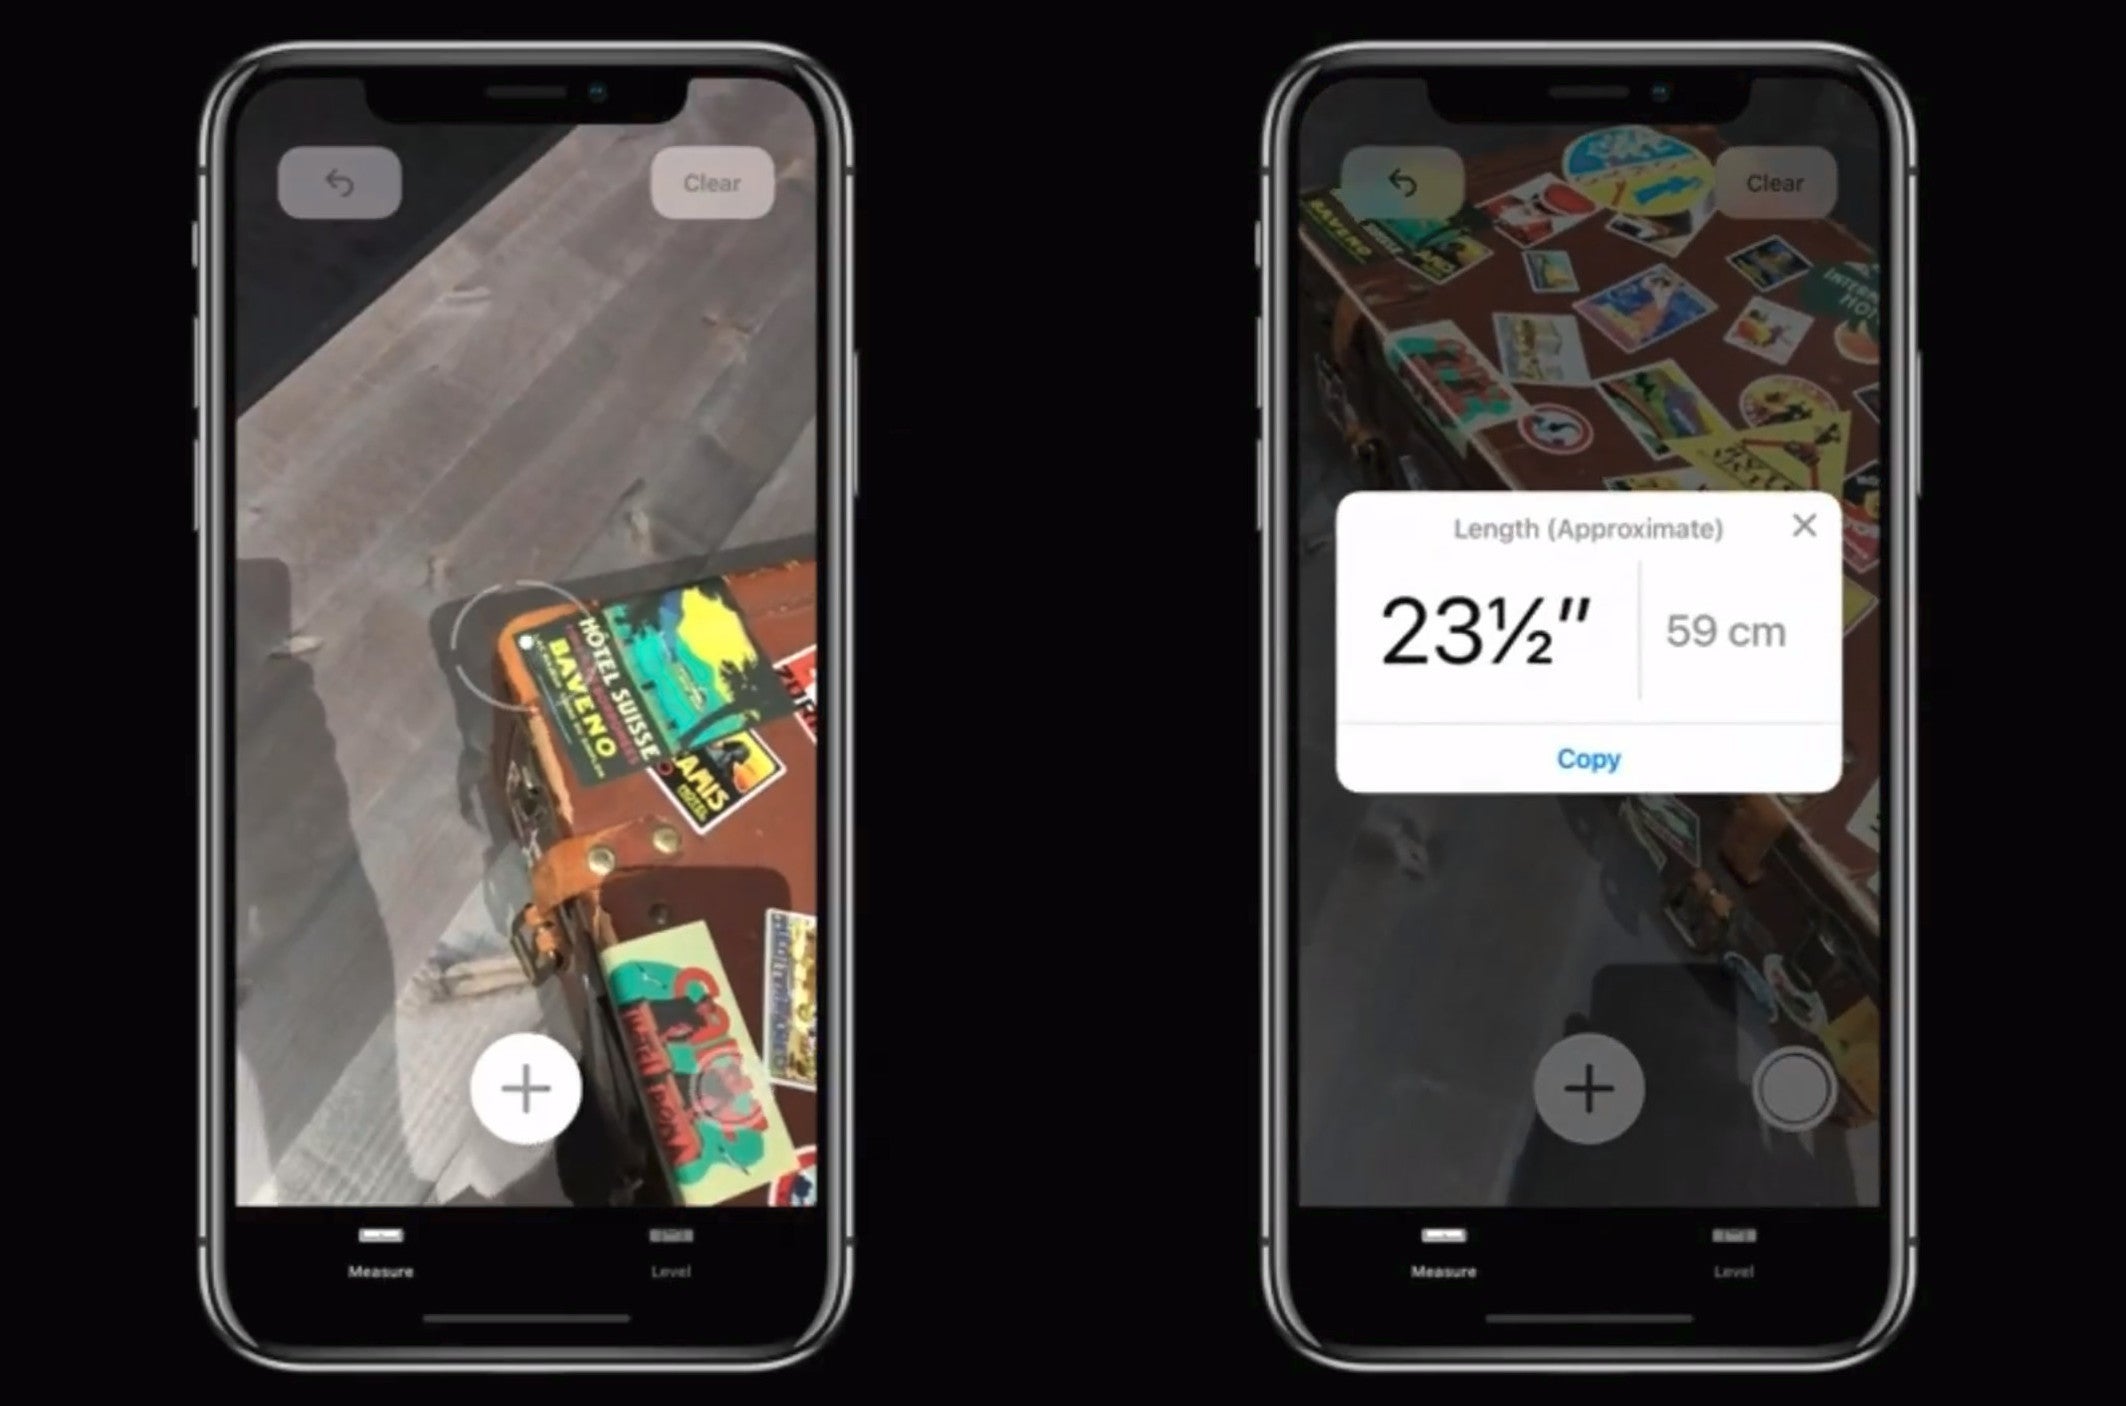 Measure is a new app in iOS 12 for measuring real-world objects through AR - iOS 12 is announced with focus on performance and augmented reality